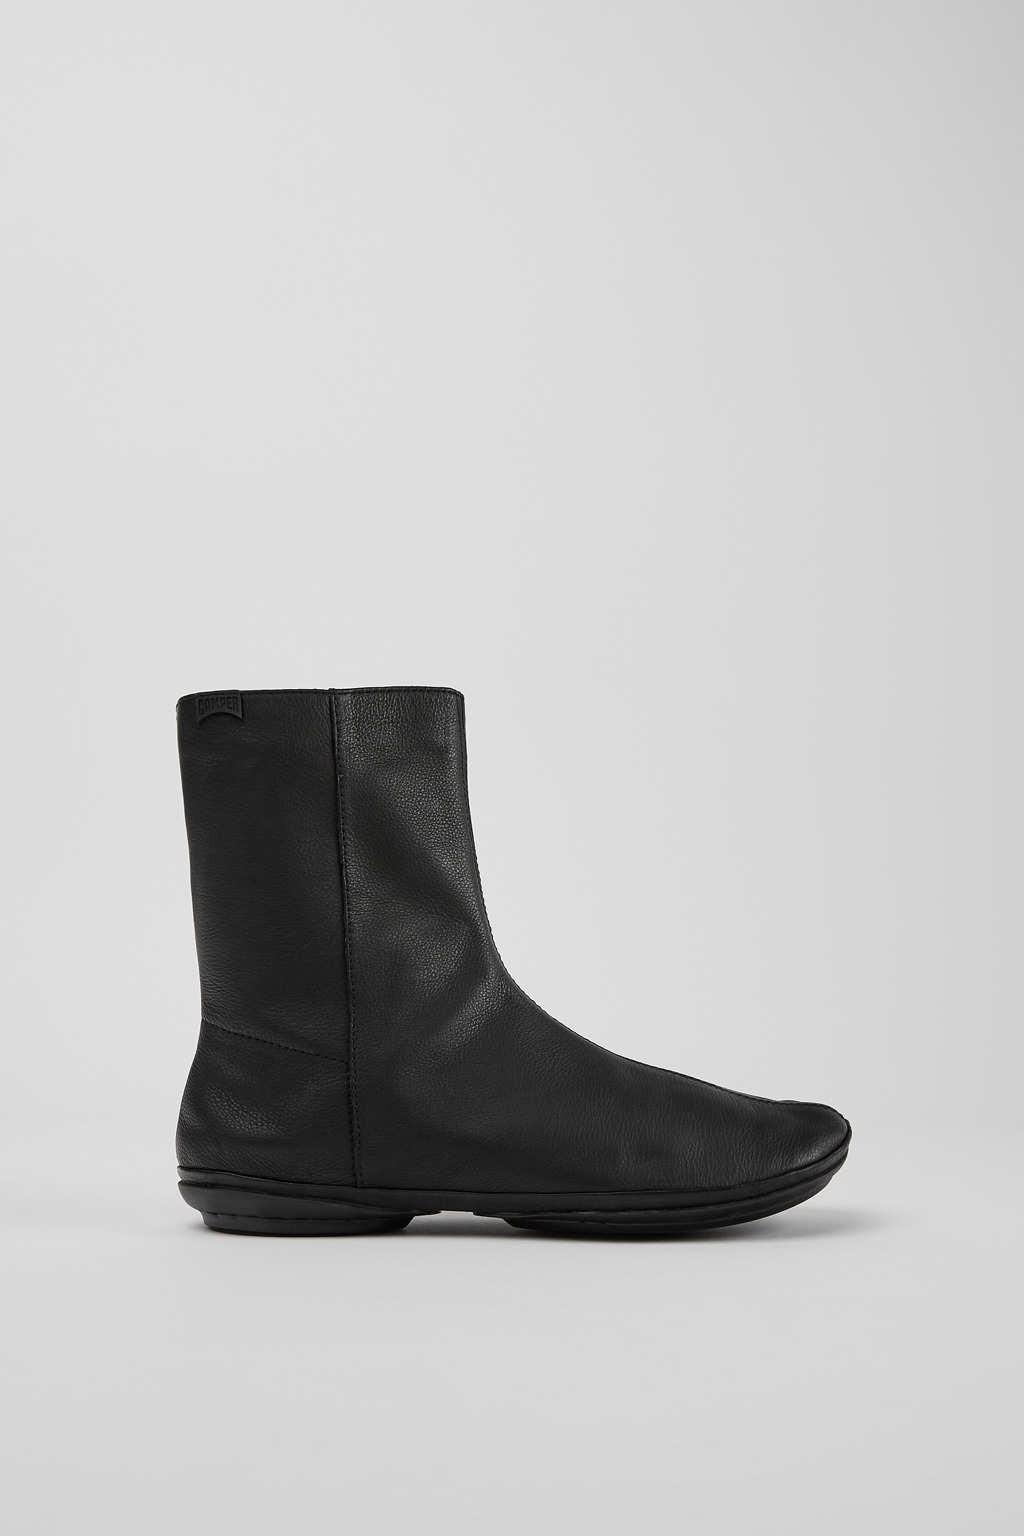 Right Black Boots for Women - Fall/Winter collection - Camper Canada